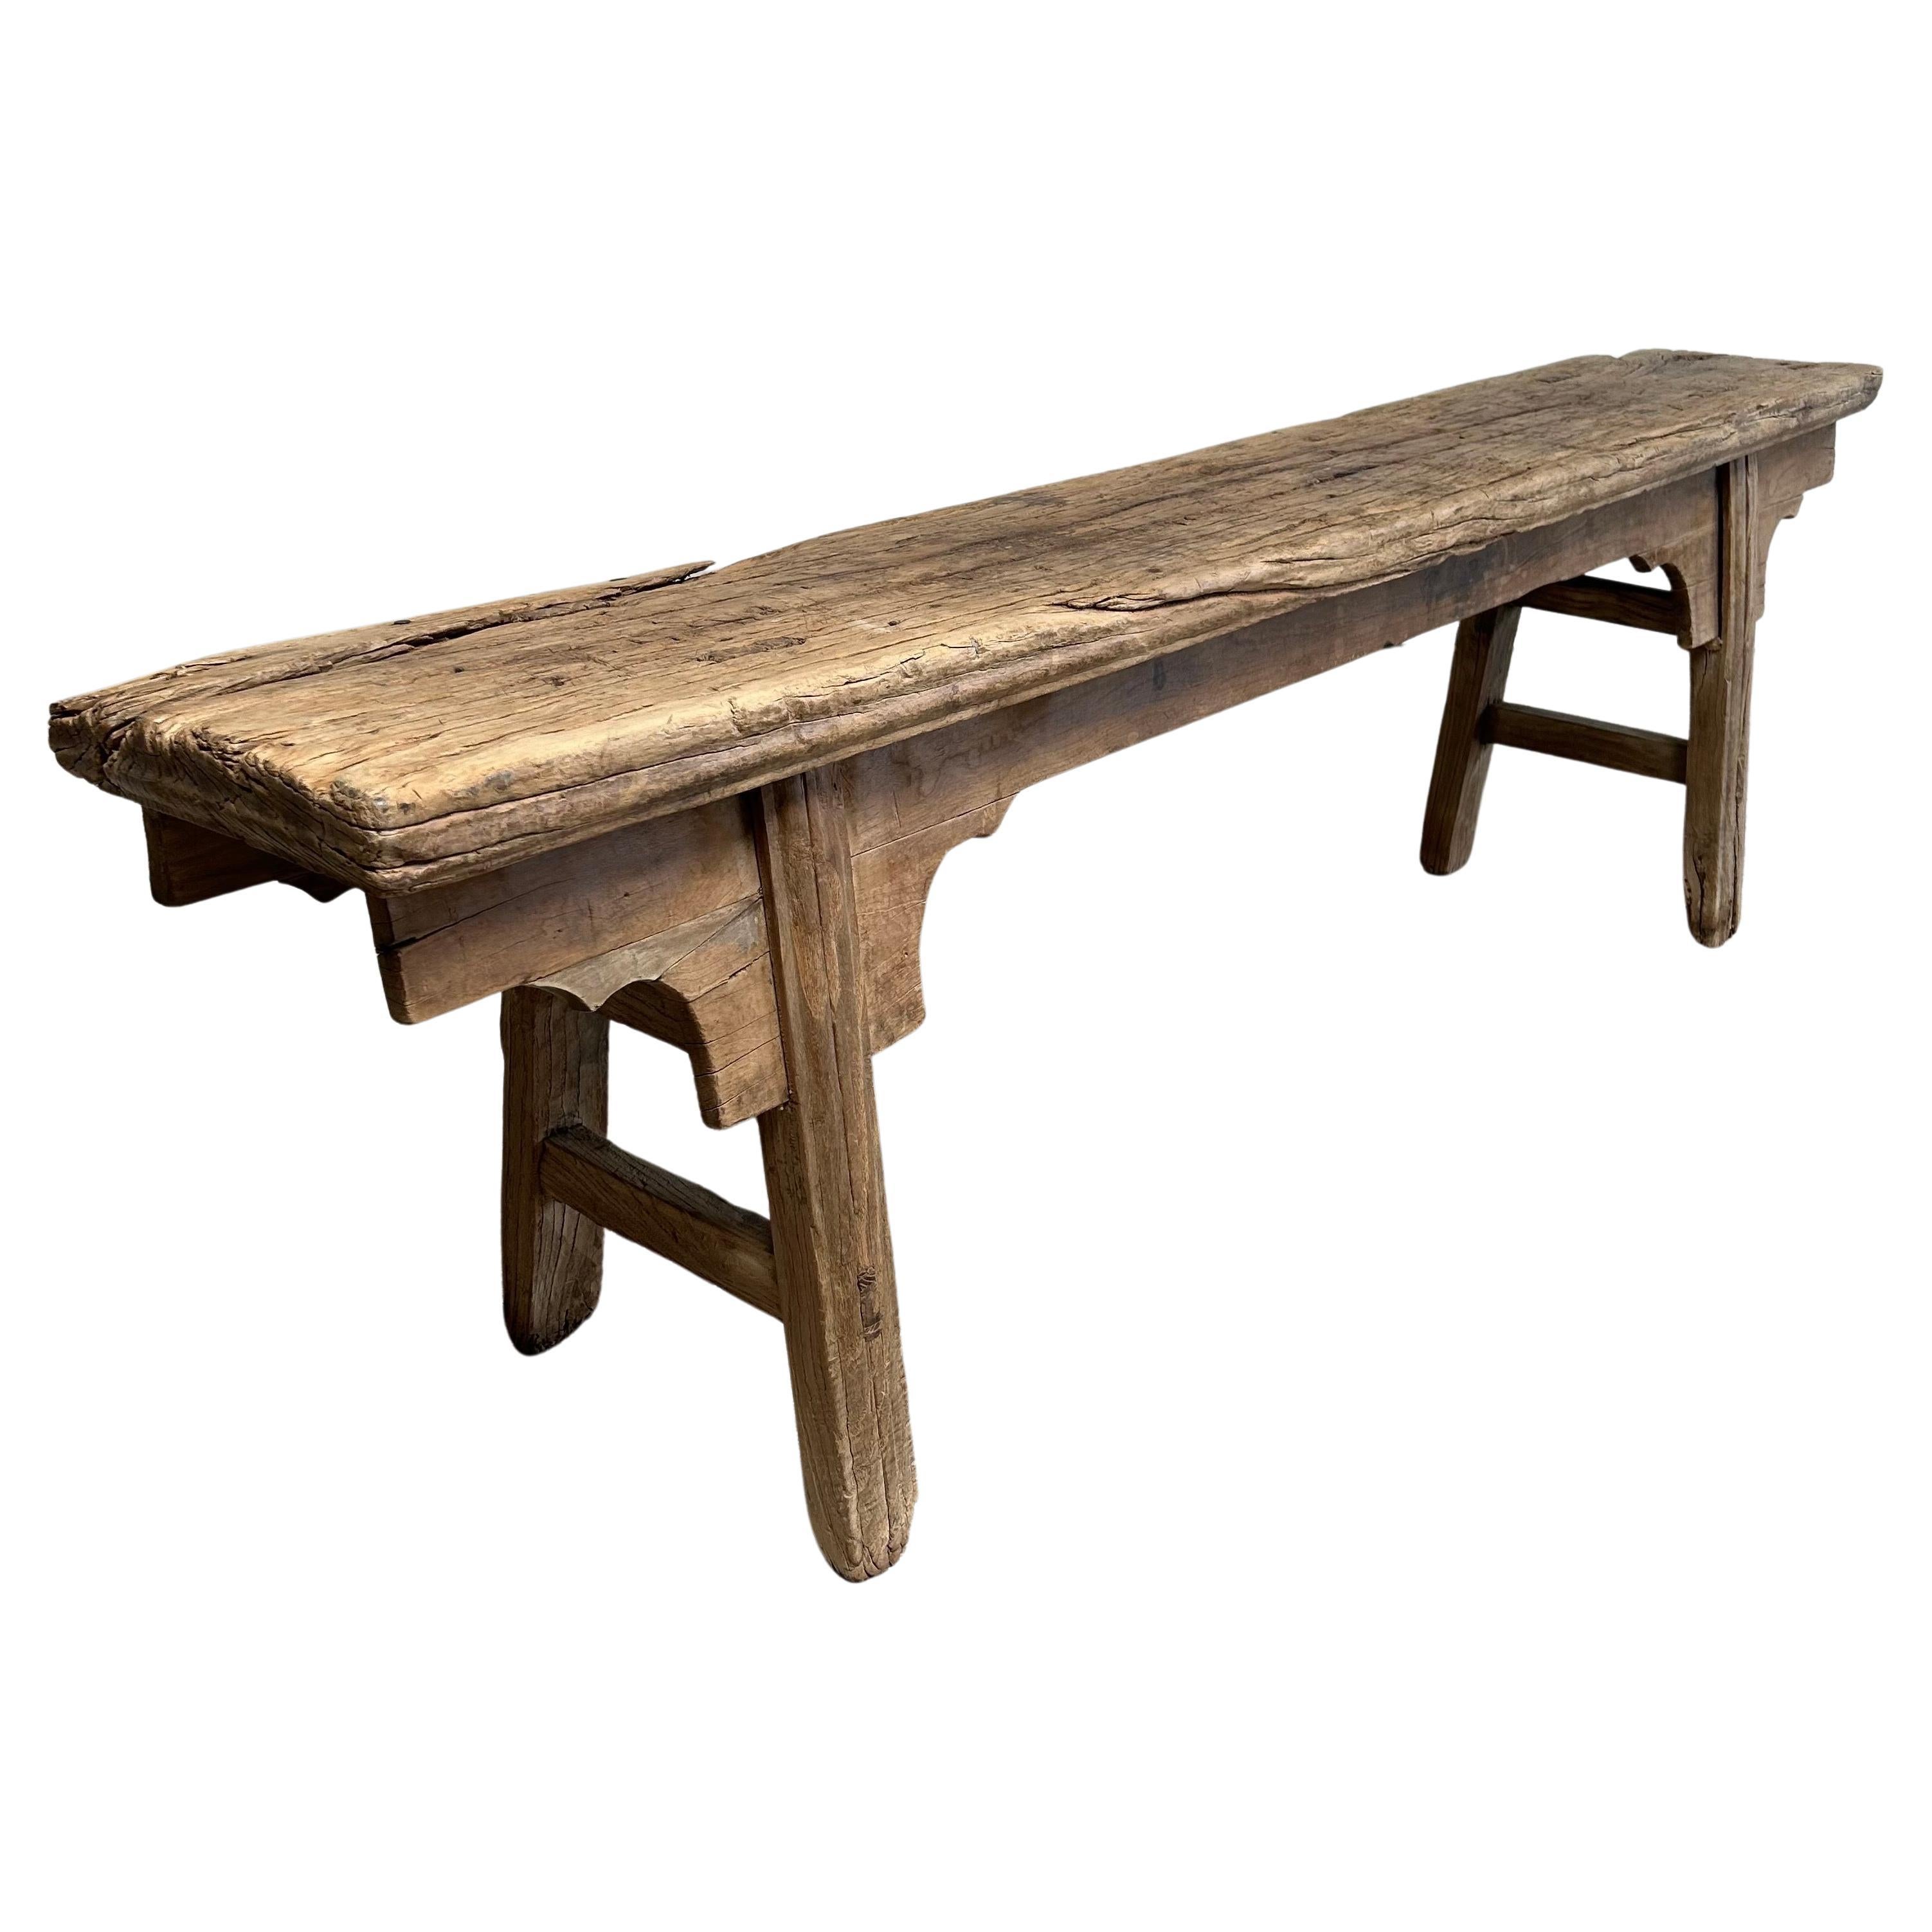 These are the real vintage antique elm wood benches! Beautiful antique patina, with weathering and age, these are solid and sturdy ready for daily use, use as a table behind a sofa, stool, coffee table, they are great for any space. Each piece is